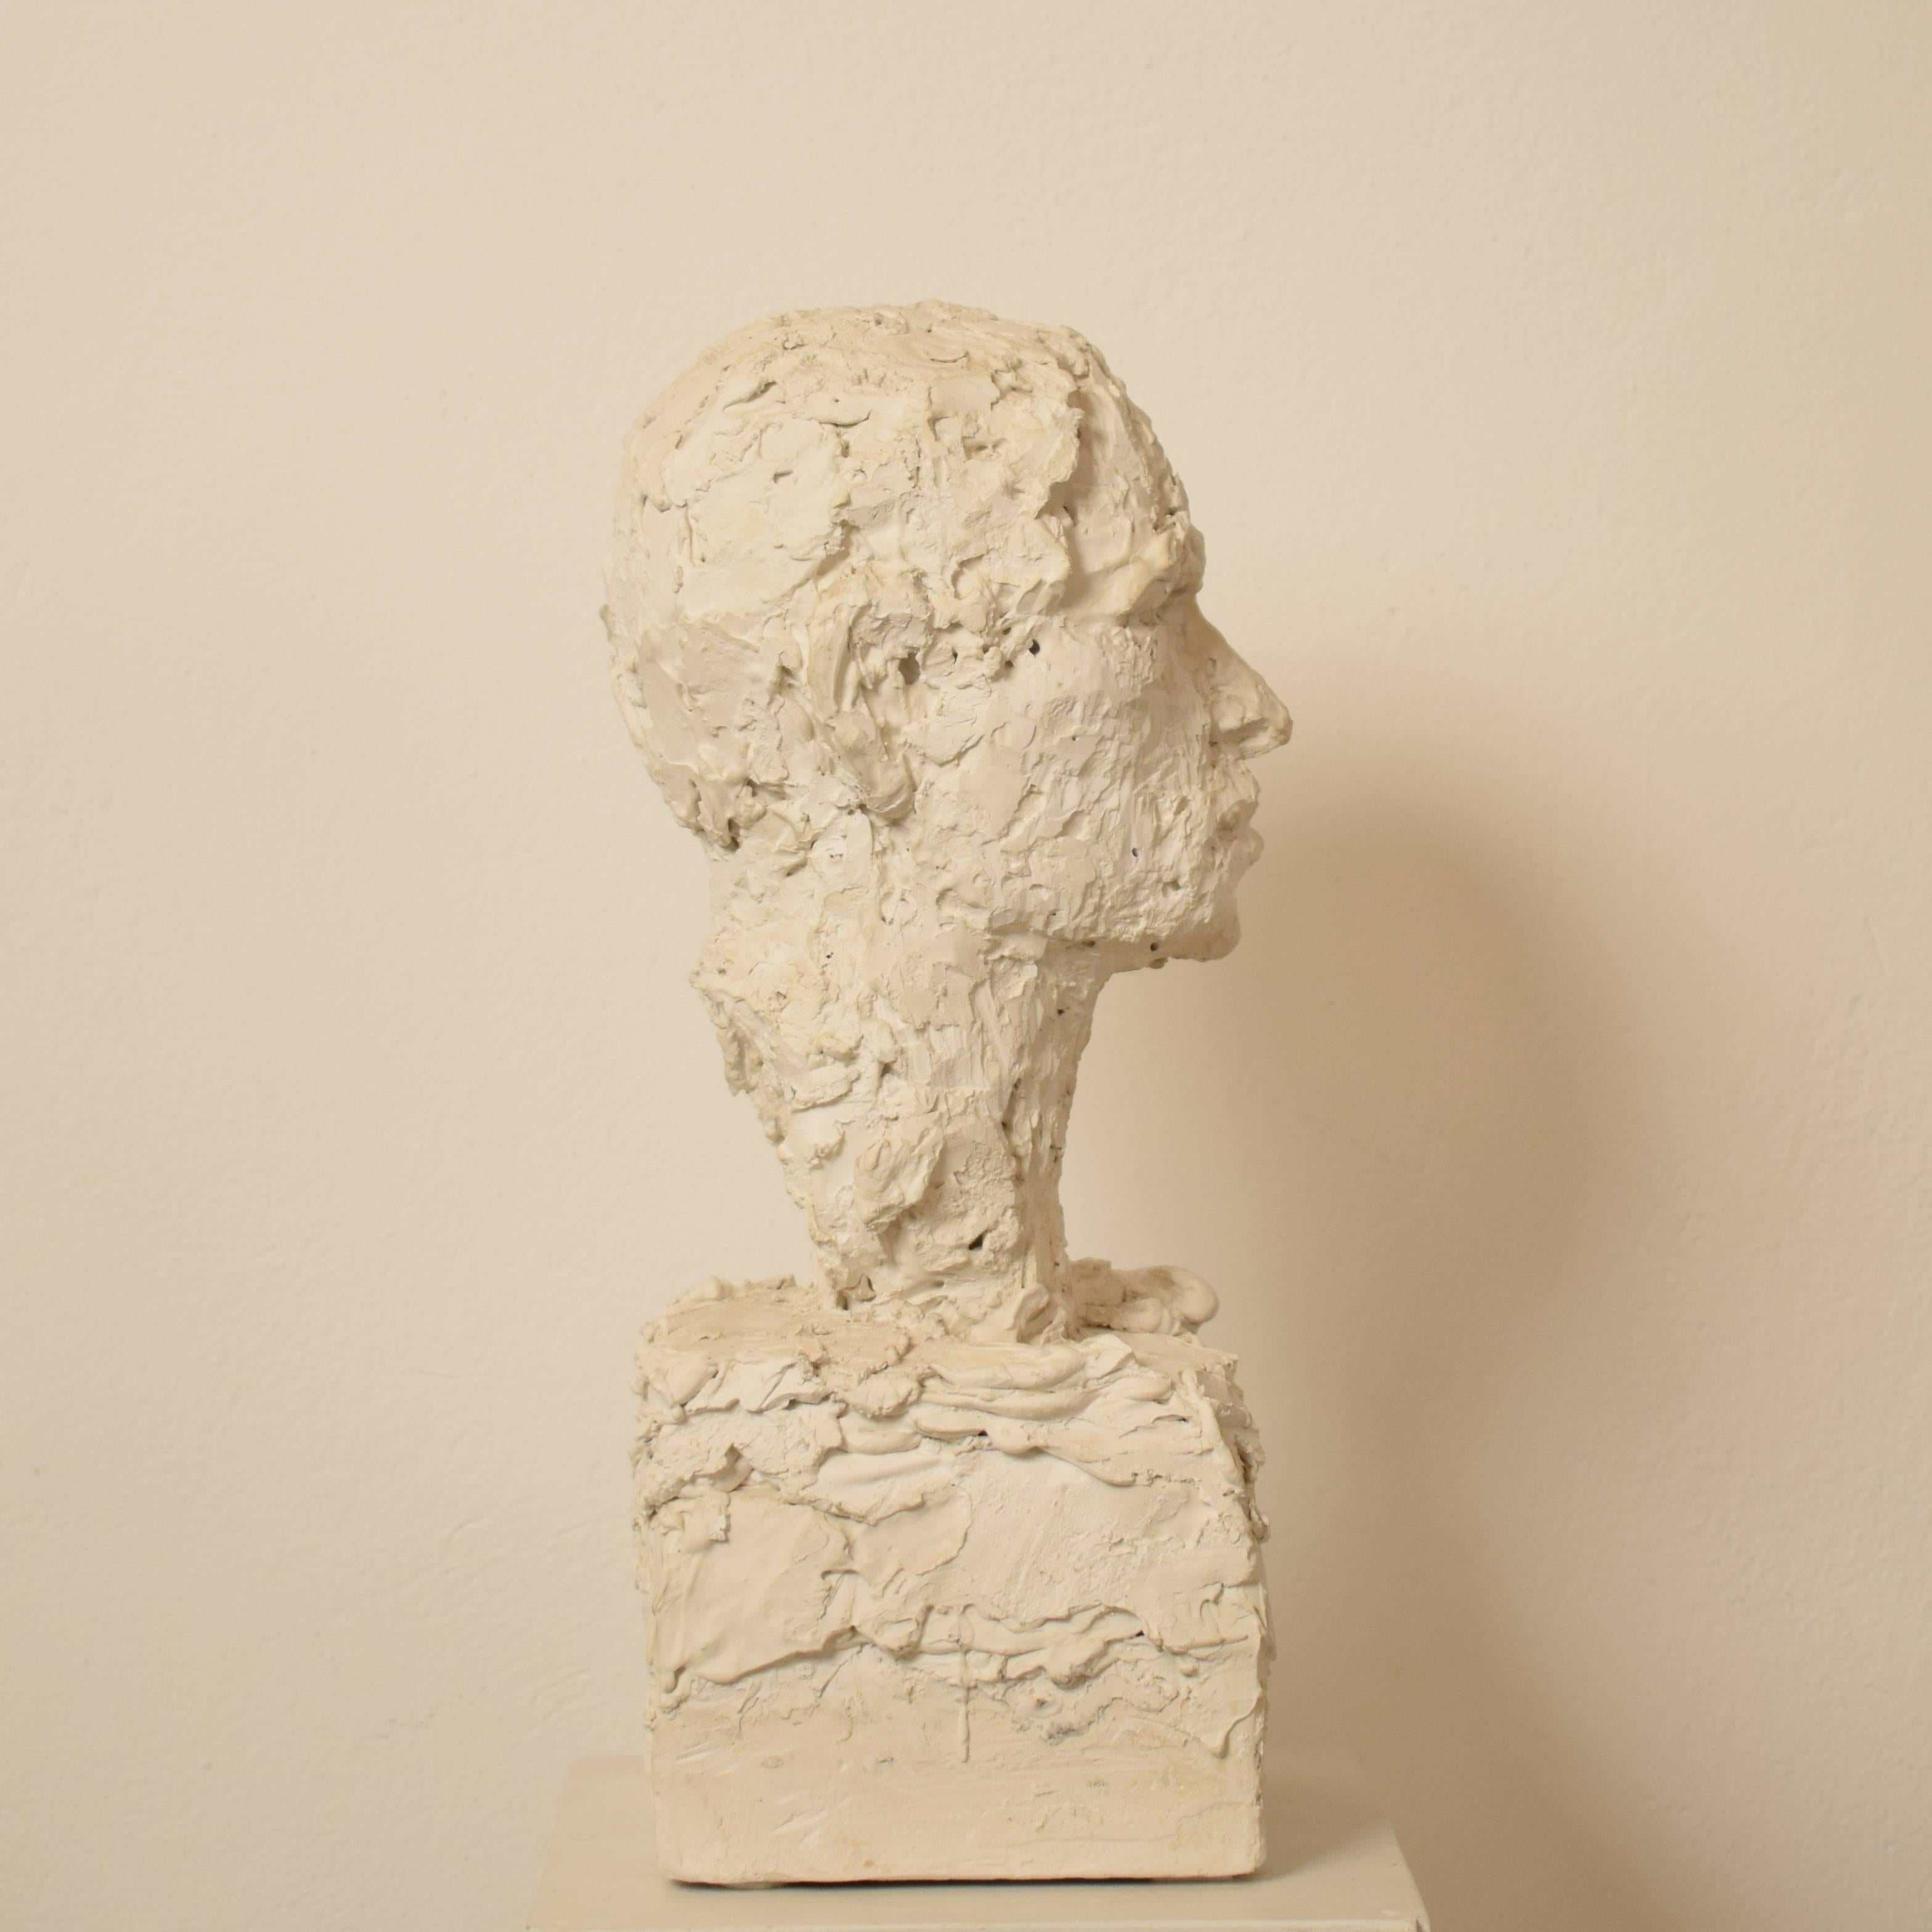 Early 20th Century Plaster Bust of a Man, circa 1920 (Gips)